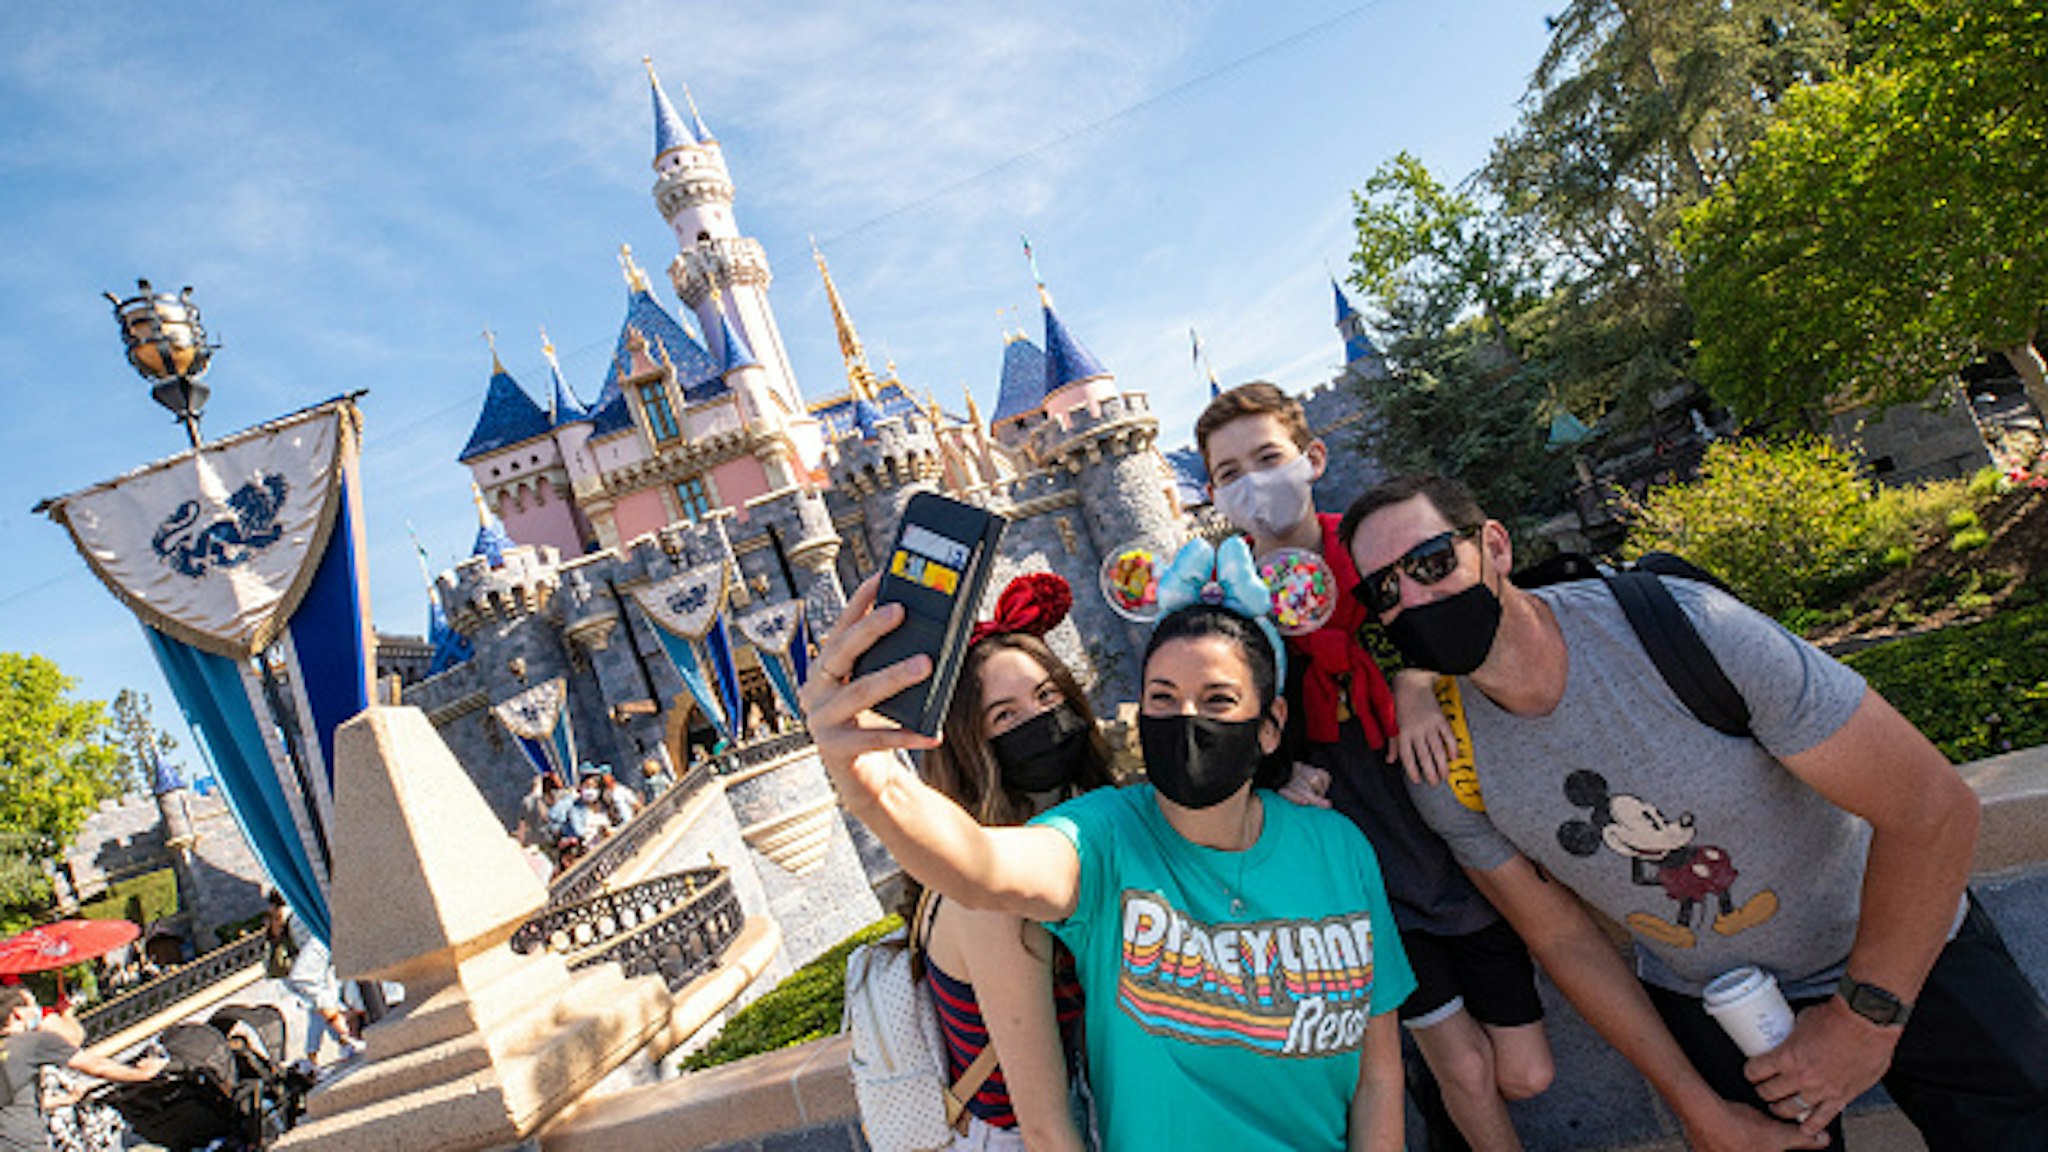 ANAHEIM, CA - APRIL 30: In this handout photo provided by Disneyland Resort, The Wotter family of Lake Elsinore, California, takes a selfie photo in front of Sleeping Beauty Castle as Disneyland Park at the Disneyland Resort on April 30, 2021 in Anaheim, California. Guests are being welcomed back as Disneyland Park, Disney California Adventure Park and Disney's Grand Californian Hotel &amp; Spa are reopening